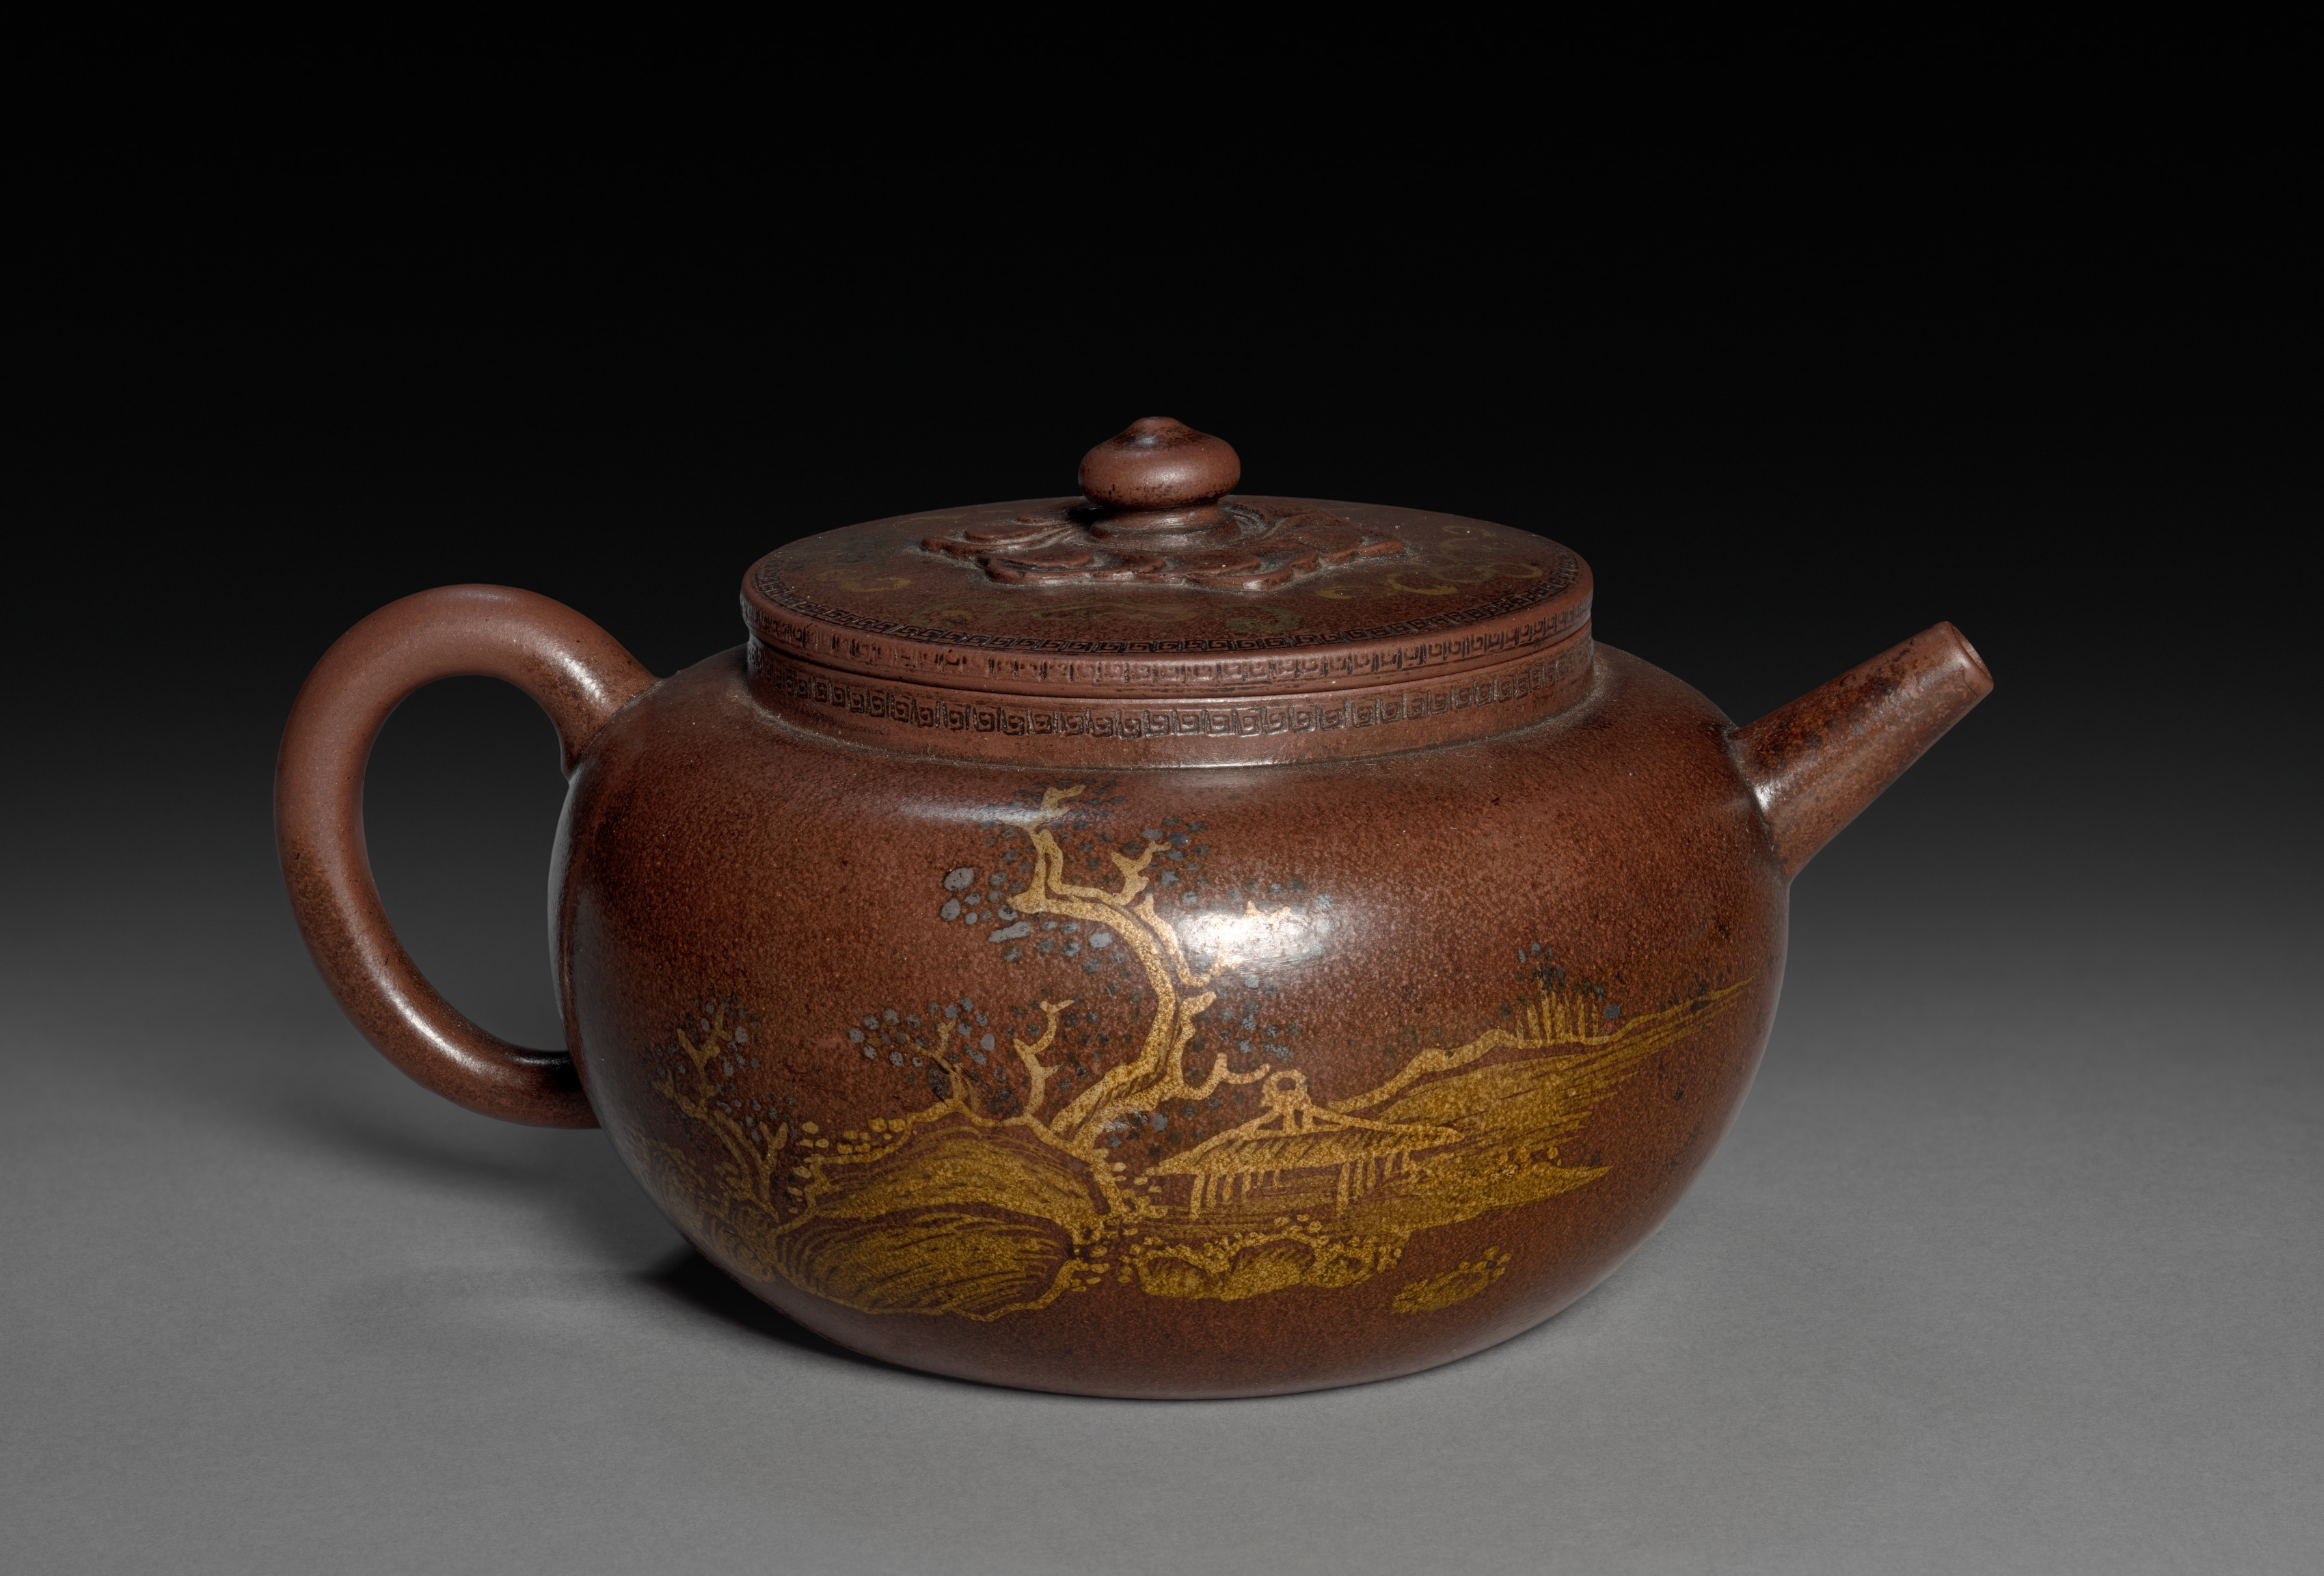 Teapot with Landscape and Imperial Poem